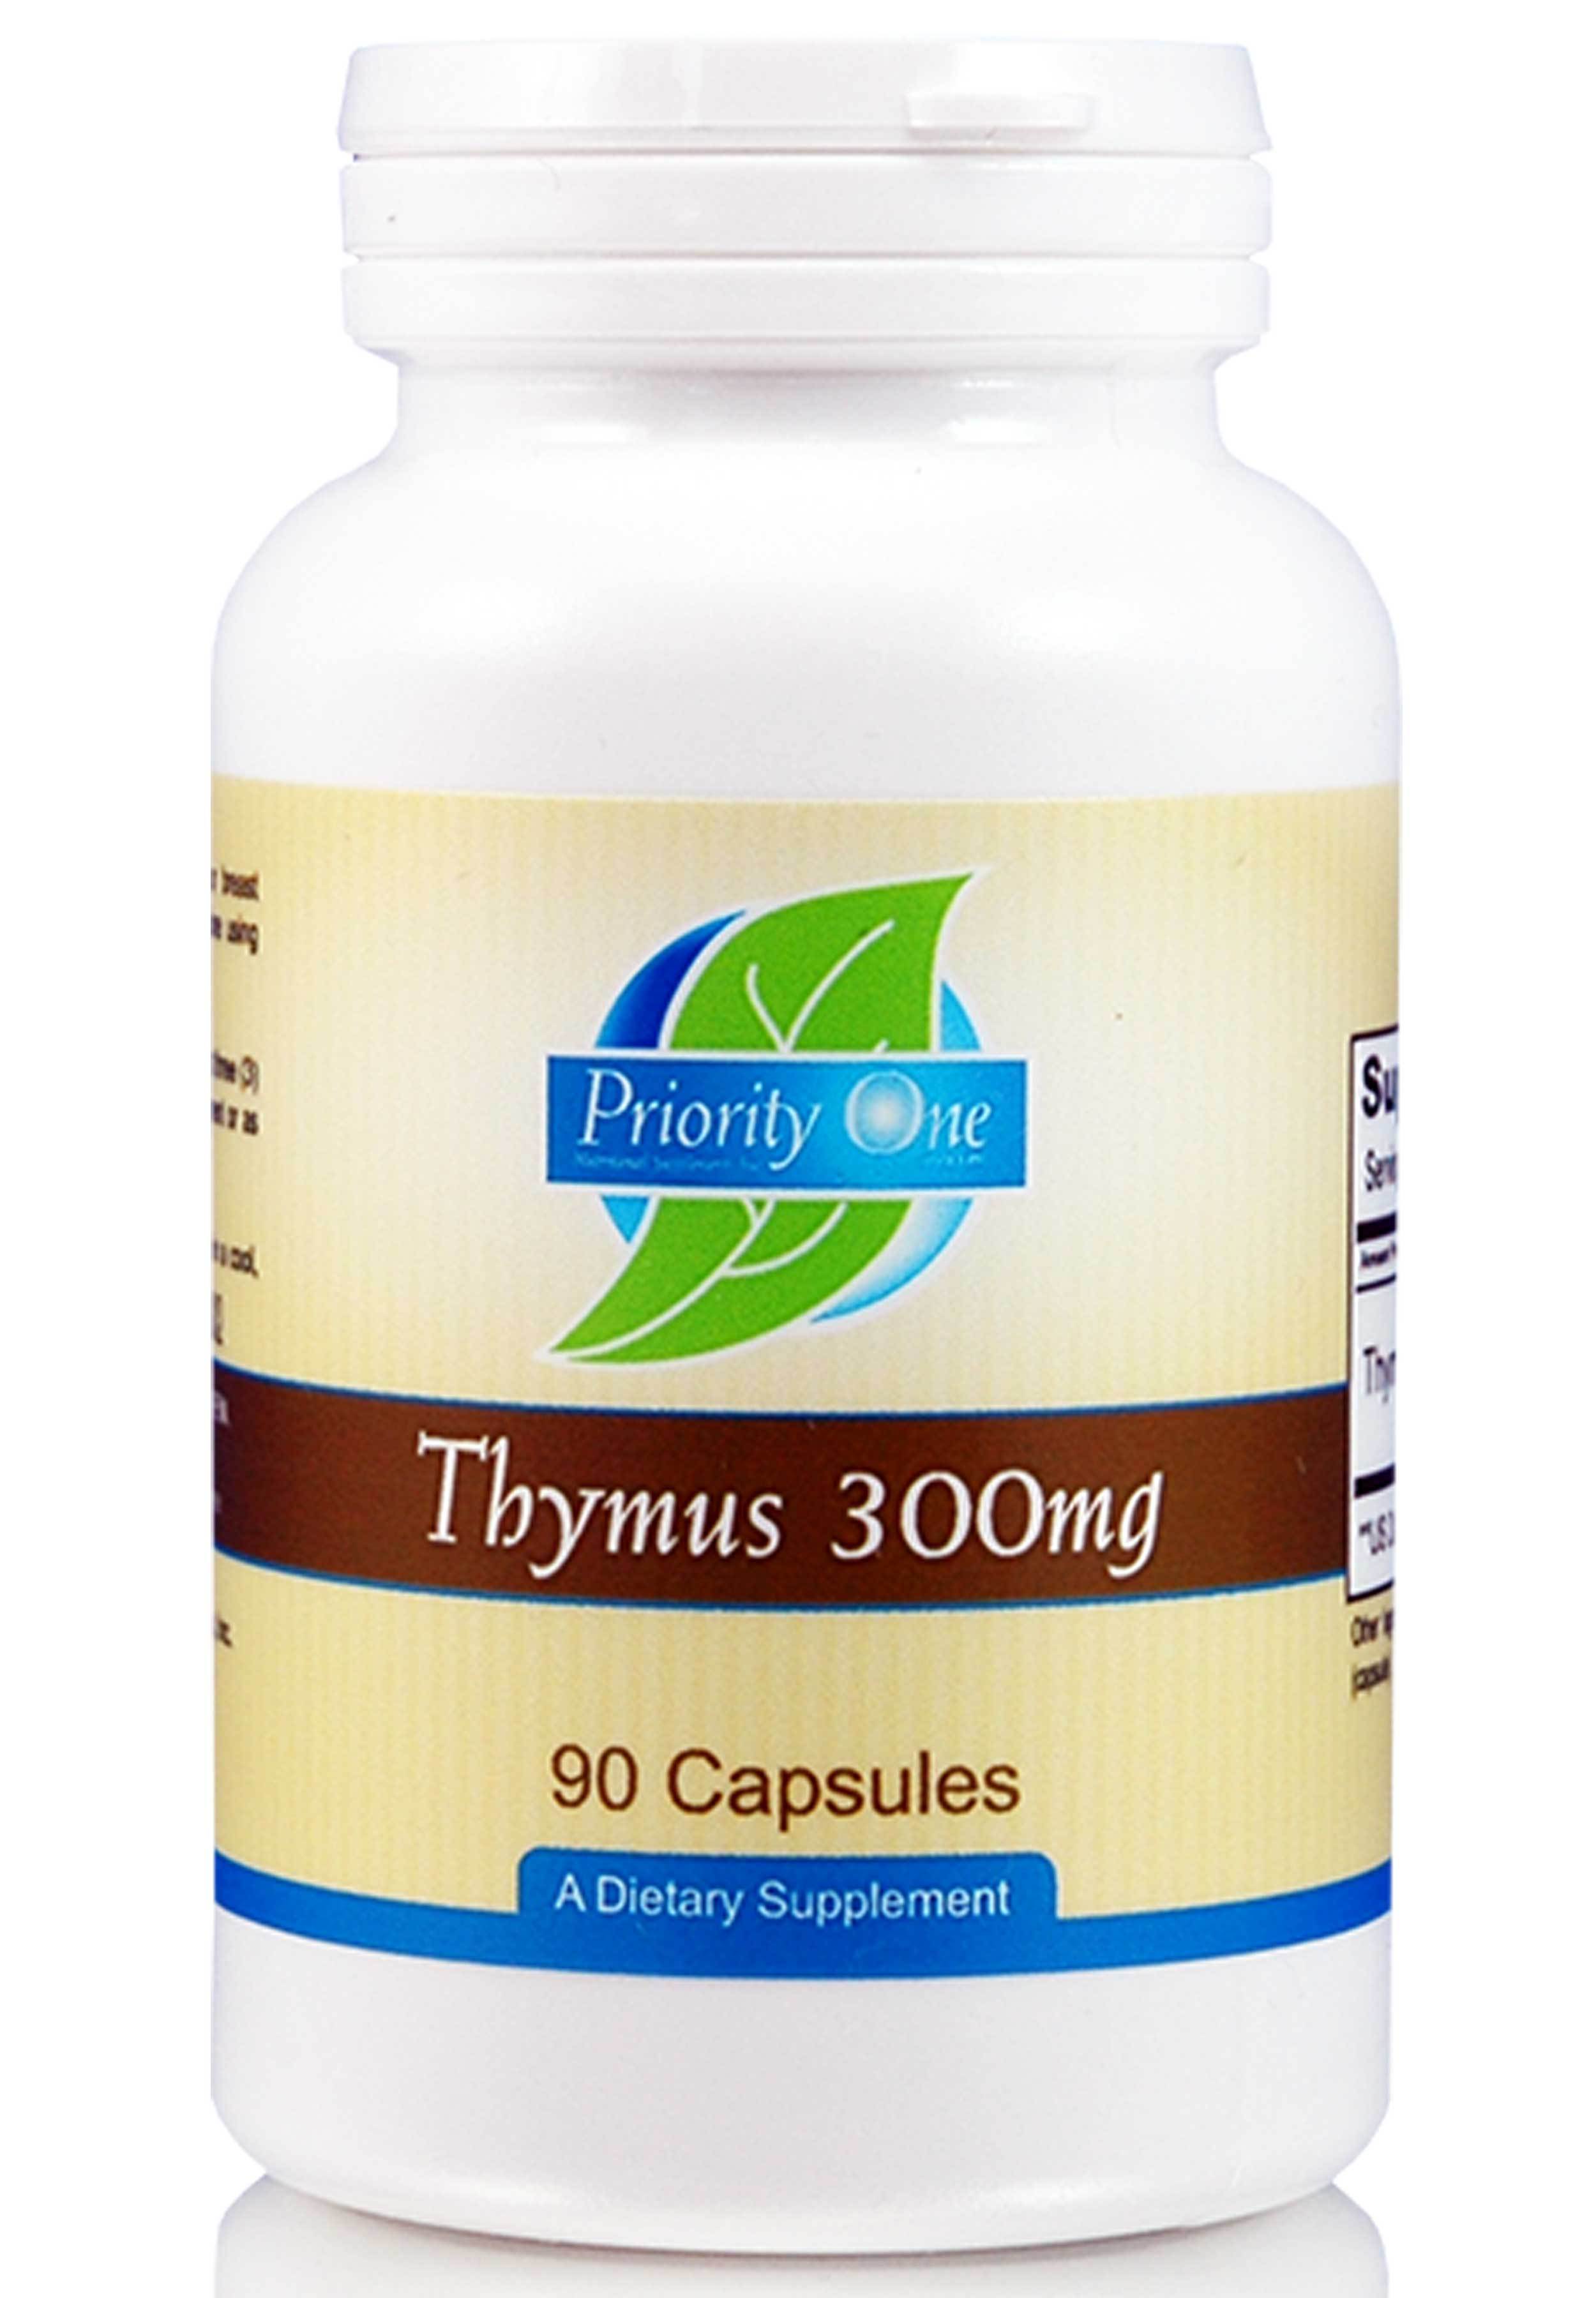 Priority One Thymus 300mg